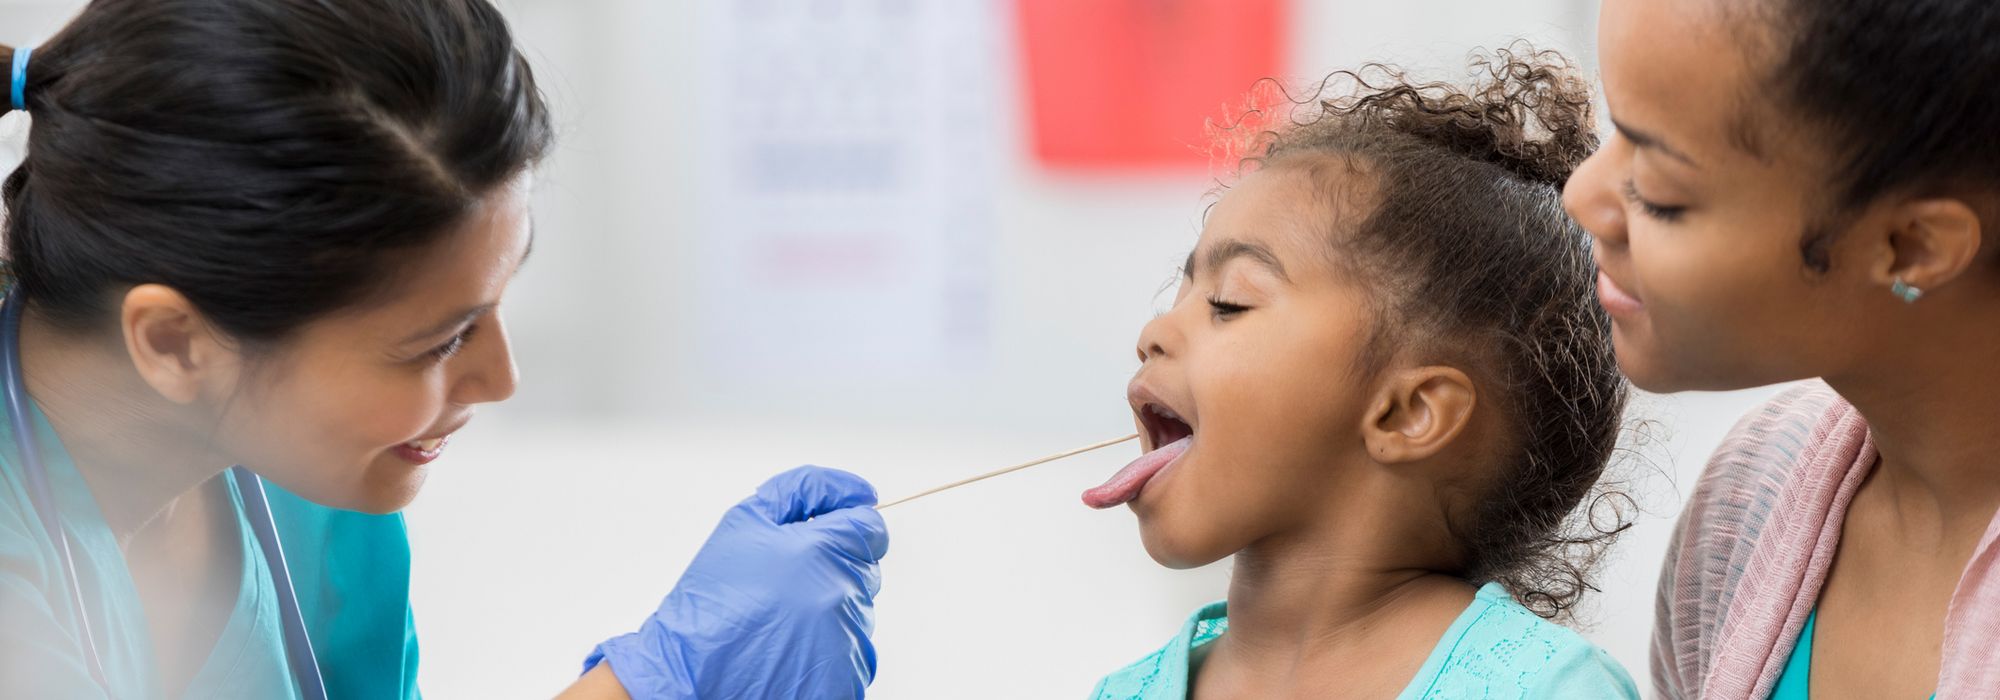 Nurse looking inside a child's mouth